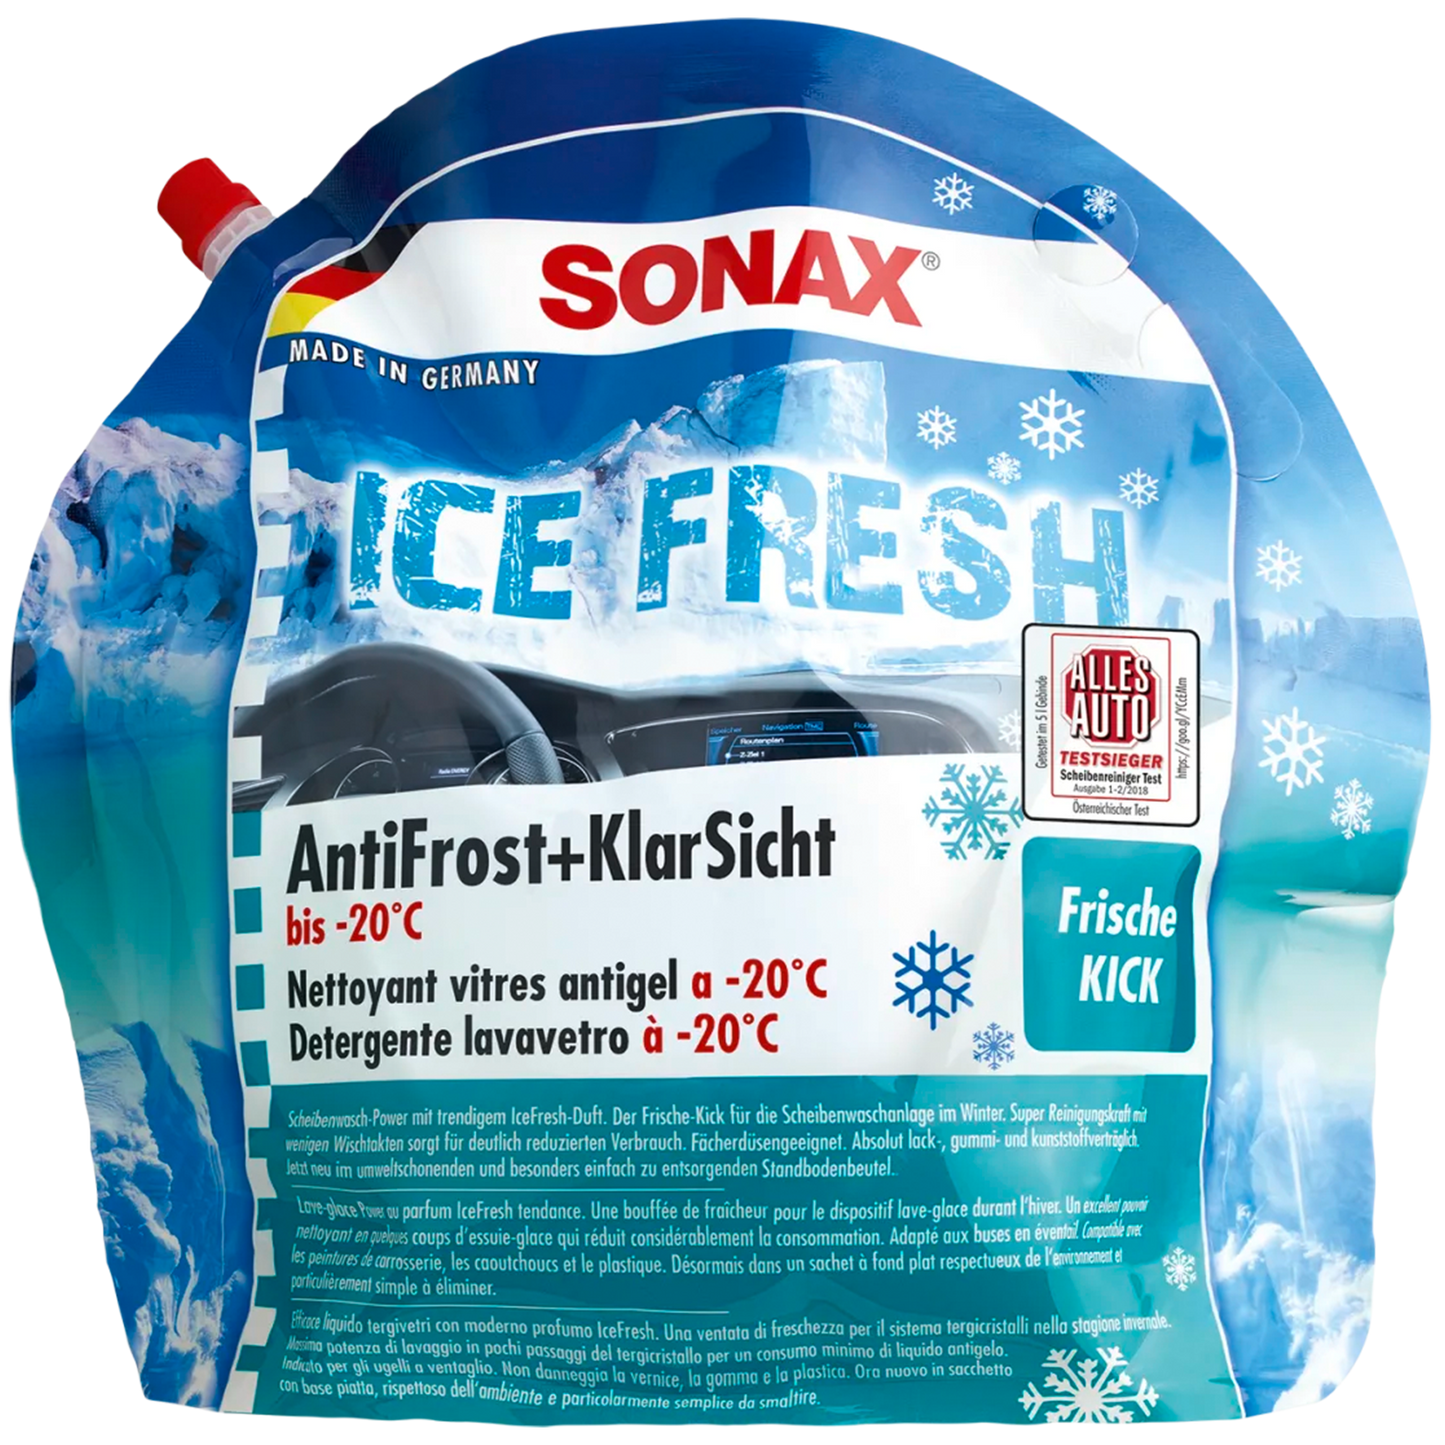 SONAX “Icefresh” antifrost &amp; clear visibility down to -20°C